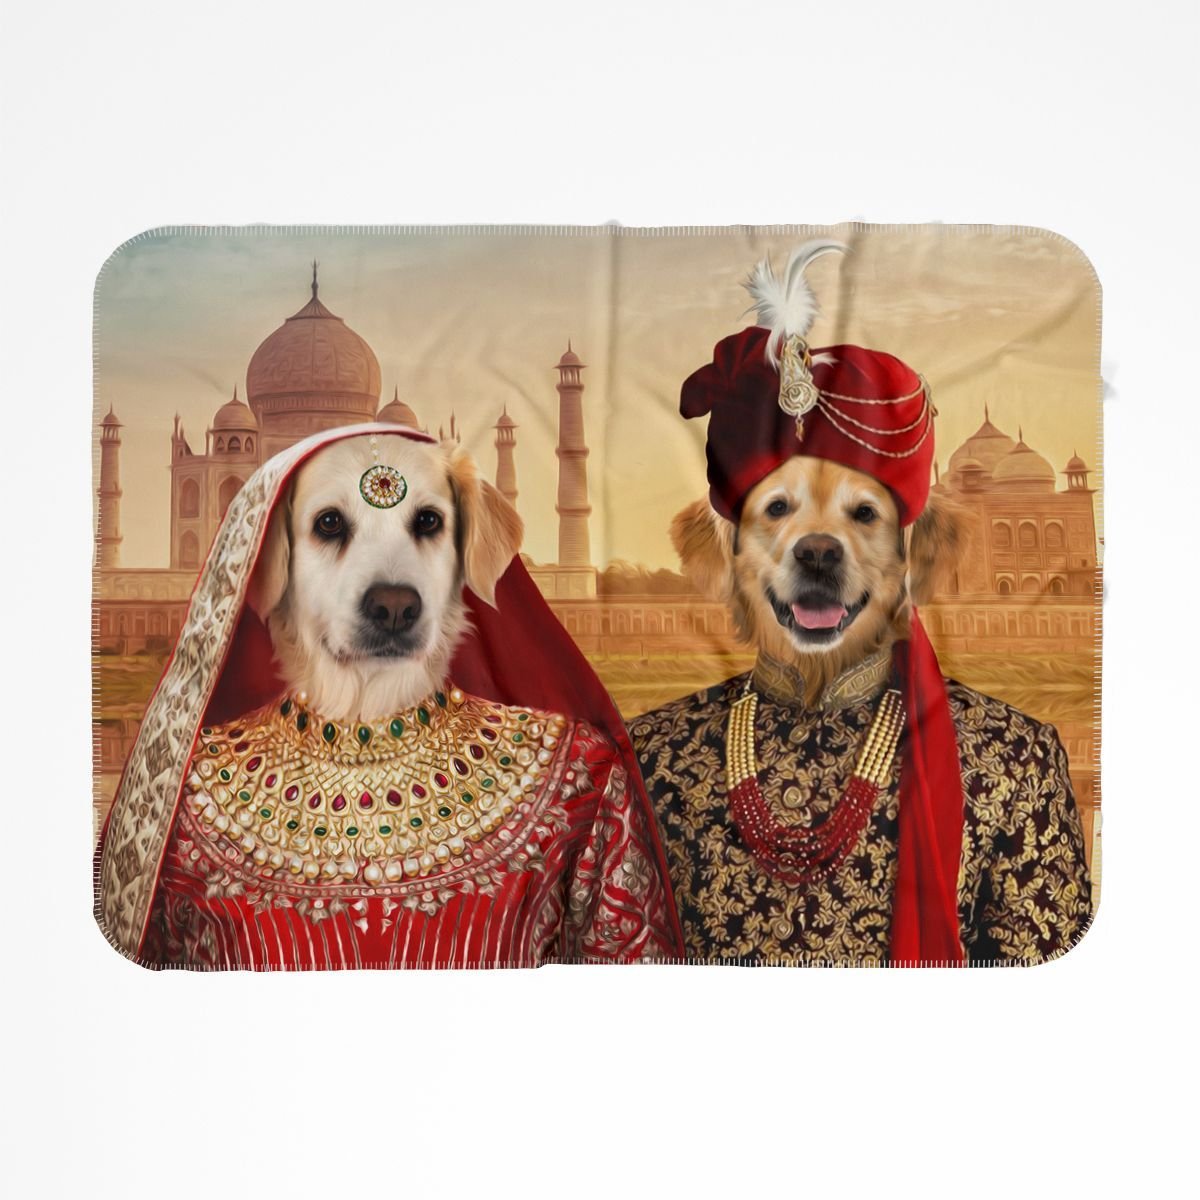 The Indian Royals: Custom 2 Pet Blanket - Paw & Glory - #pet portraits# - #dog portraits# - #pet portraits uk#Pawandglory, Pet art blanket,dog blanket embroidered, fleece blanket for dogs, make your own dog blanket, put your dog's face on a blanket, blankets with pets pictures on them, dog blanket custom